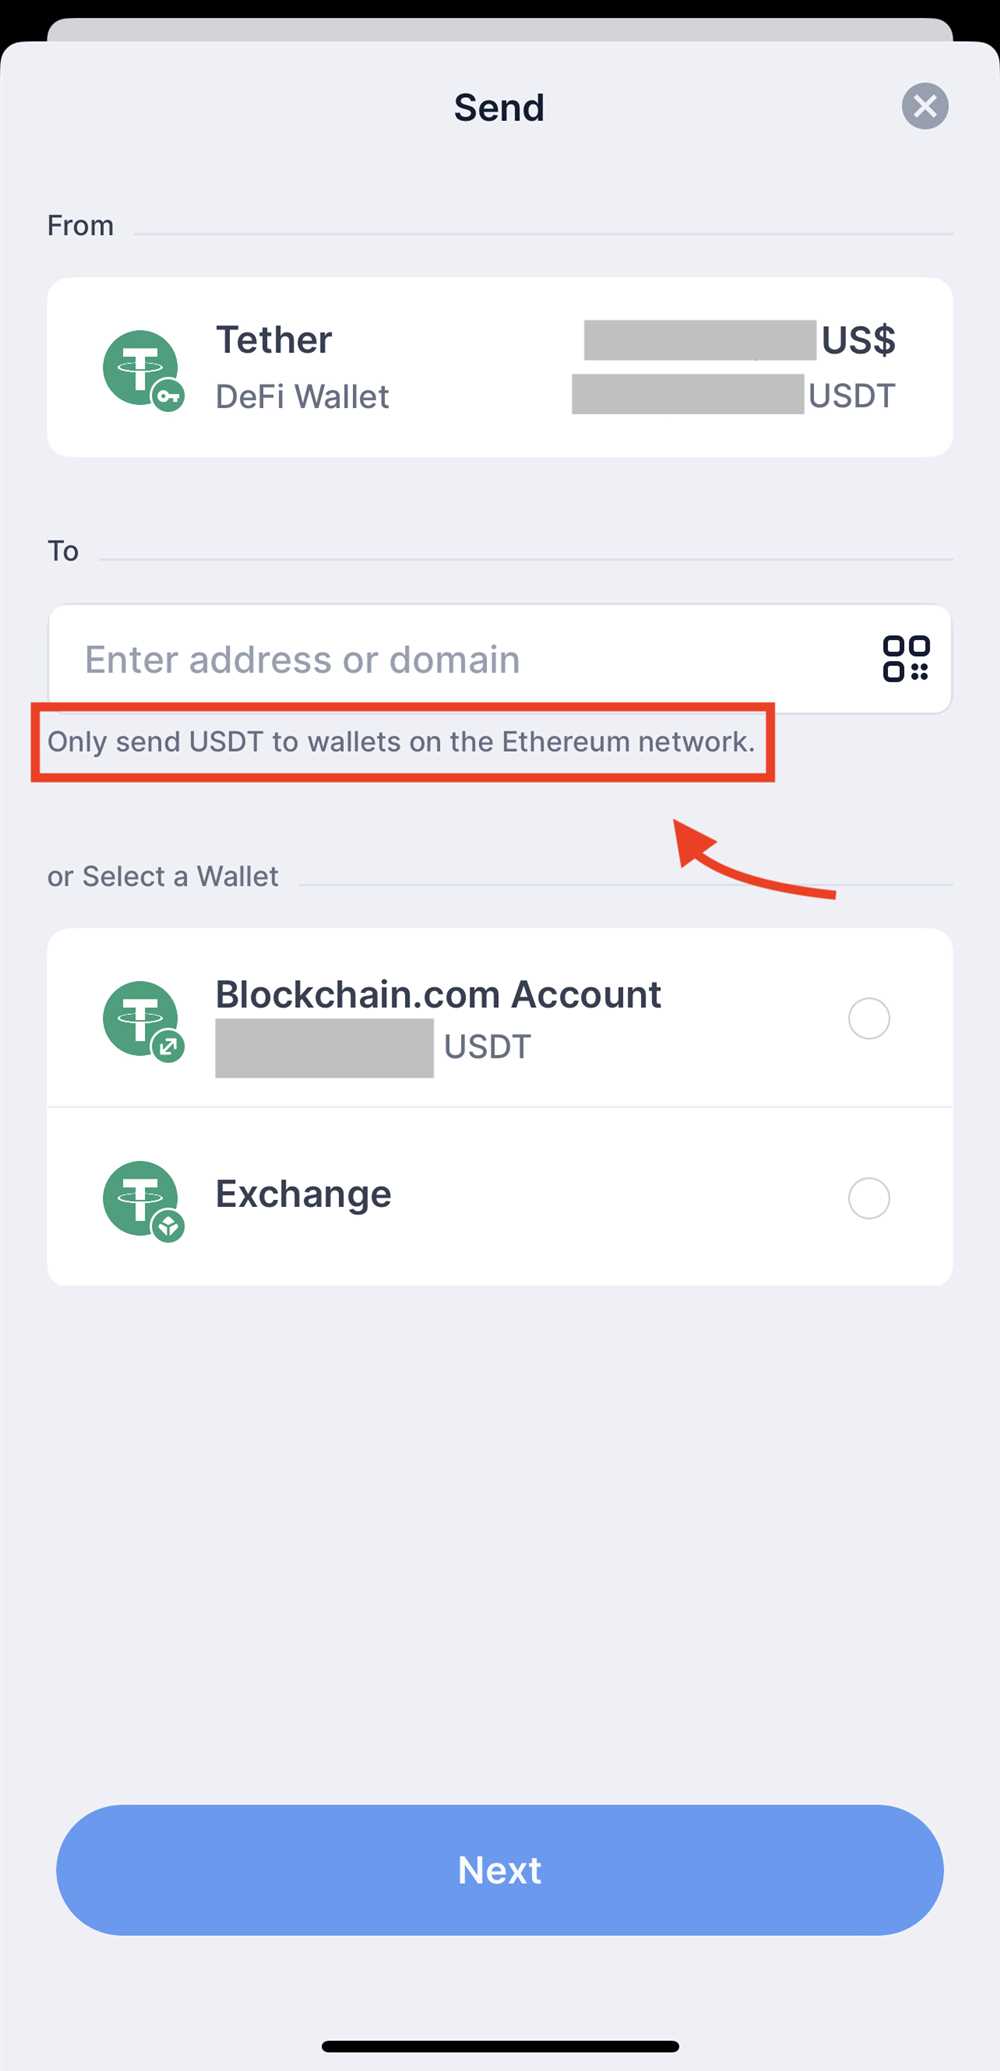 2. Confirm the compatibility of the wallet